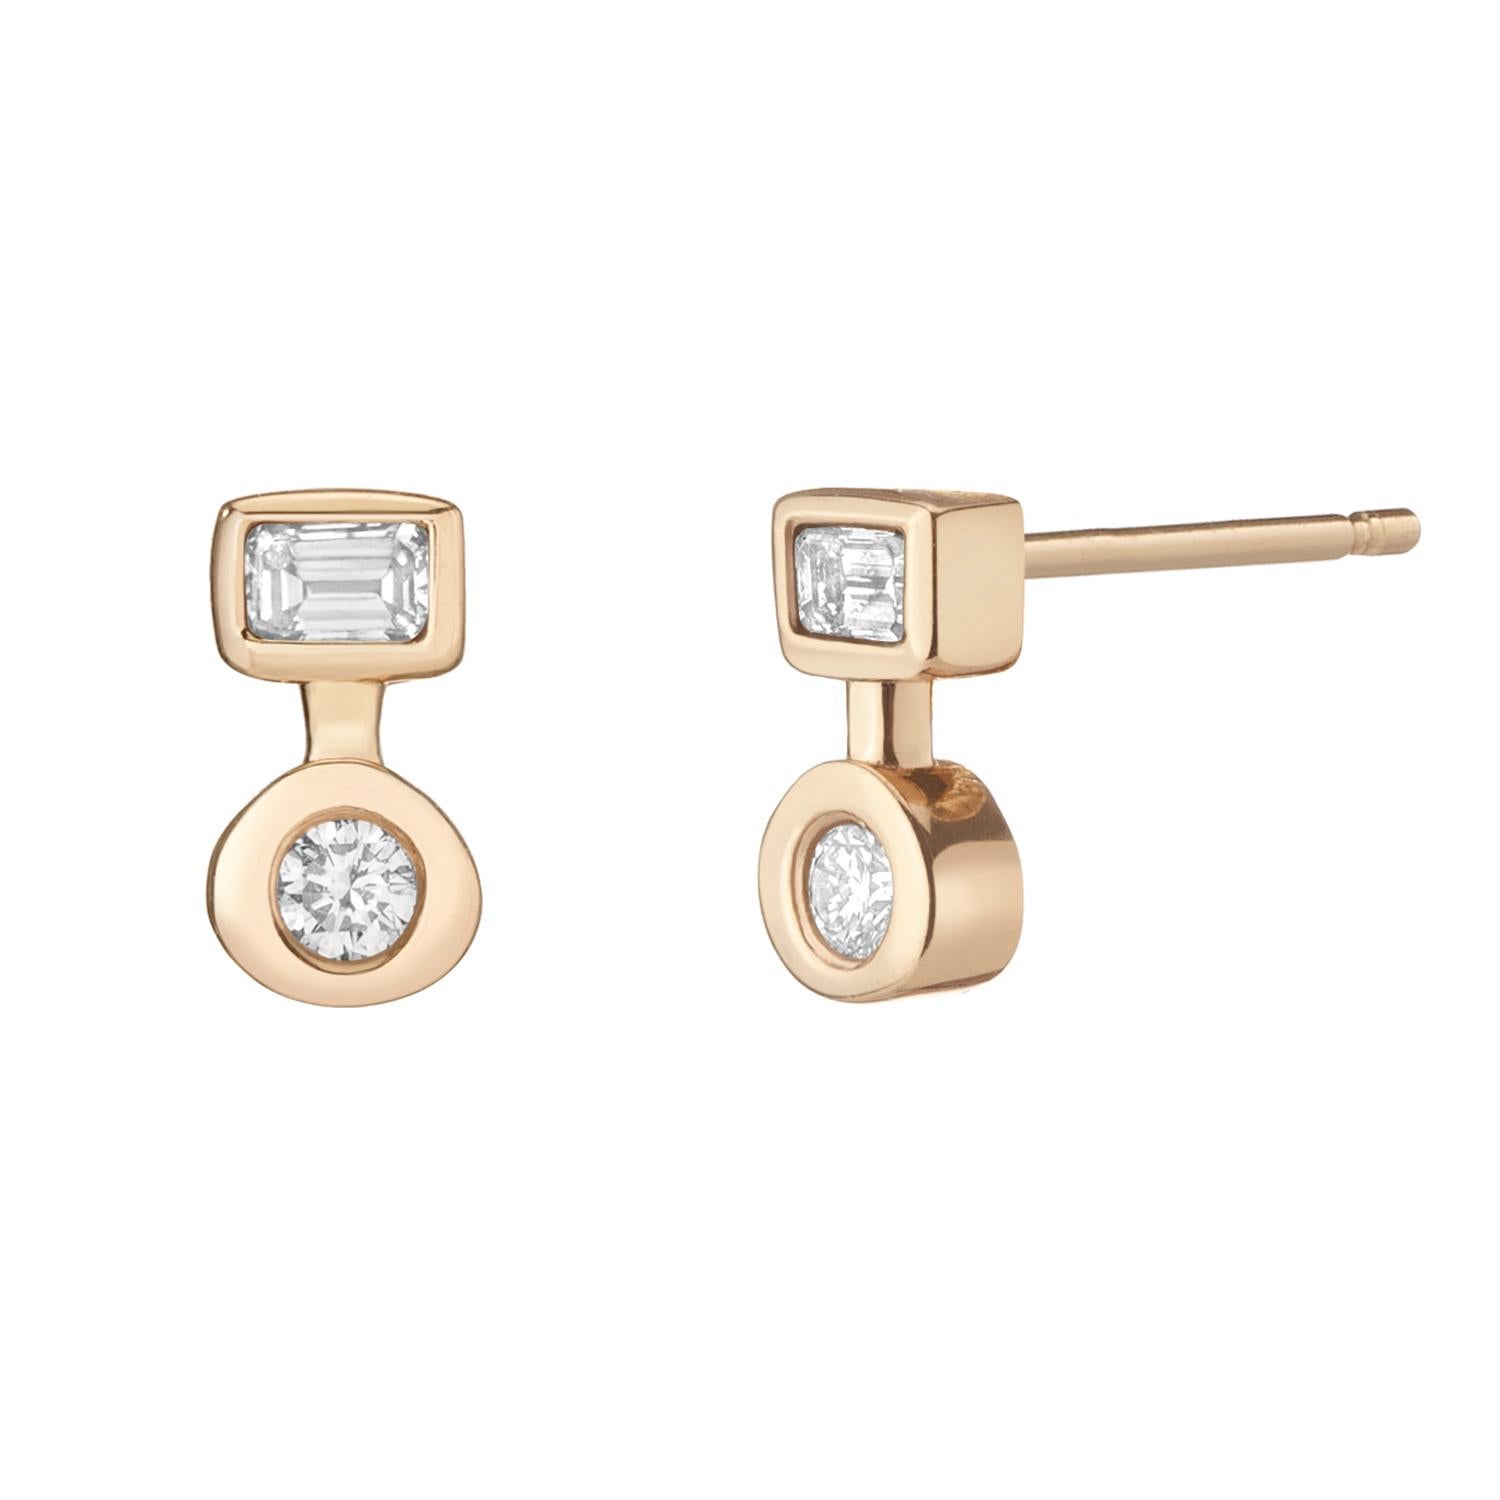 You don't have to choose between an Emerald Cut Diamond or Round Diamond, you can have both in an earring with these not-so-basic studs!

These are great for brides or for daily wear along with your favorite earrings.

Inspired by seeing the